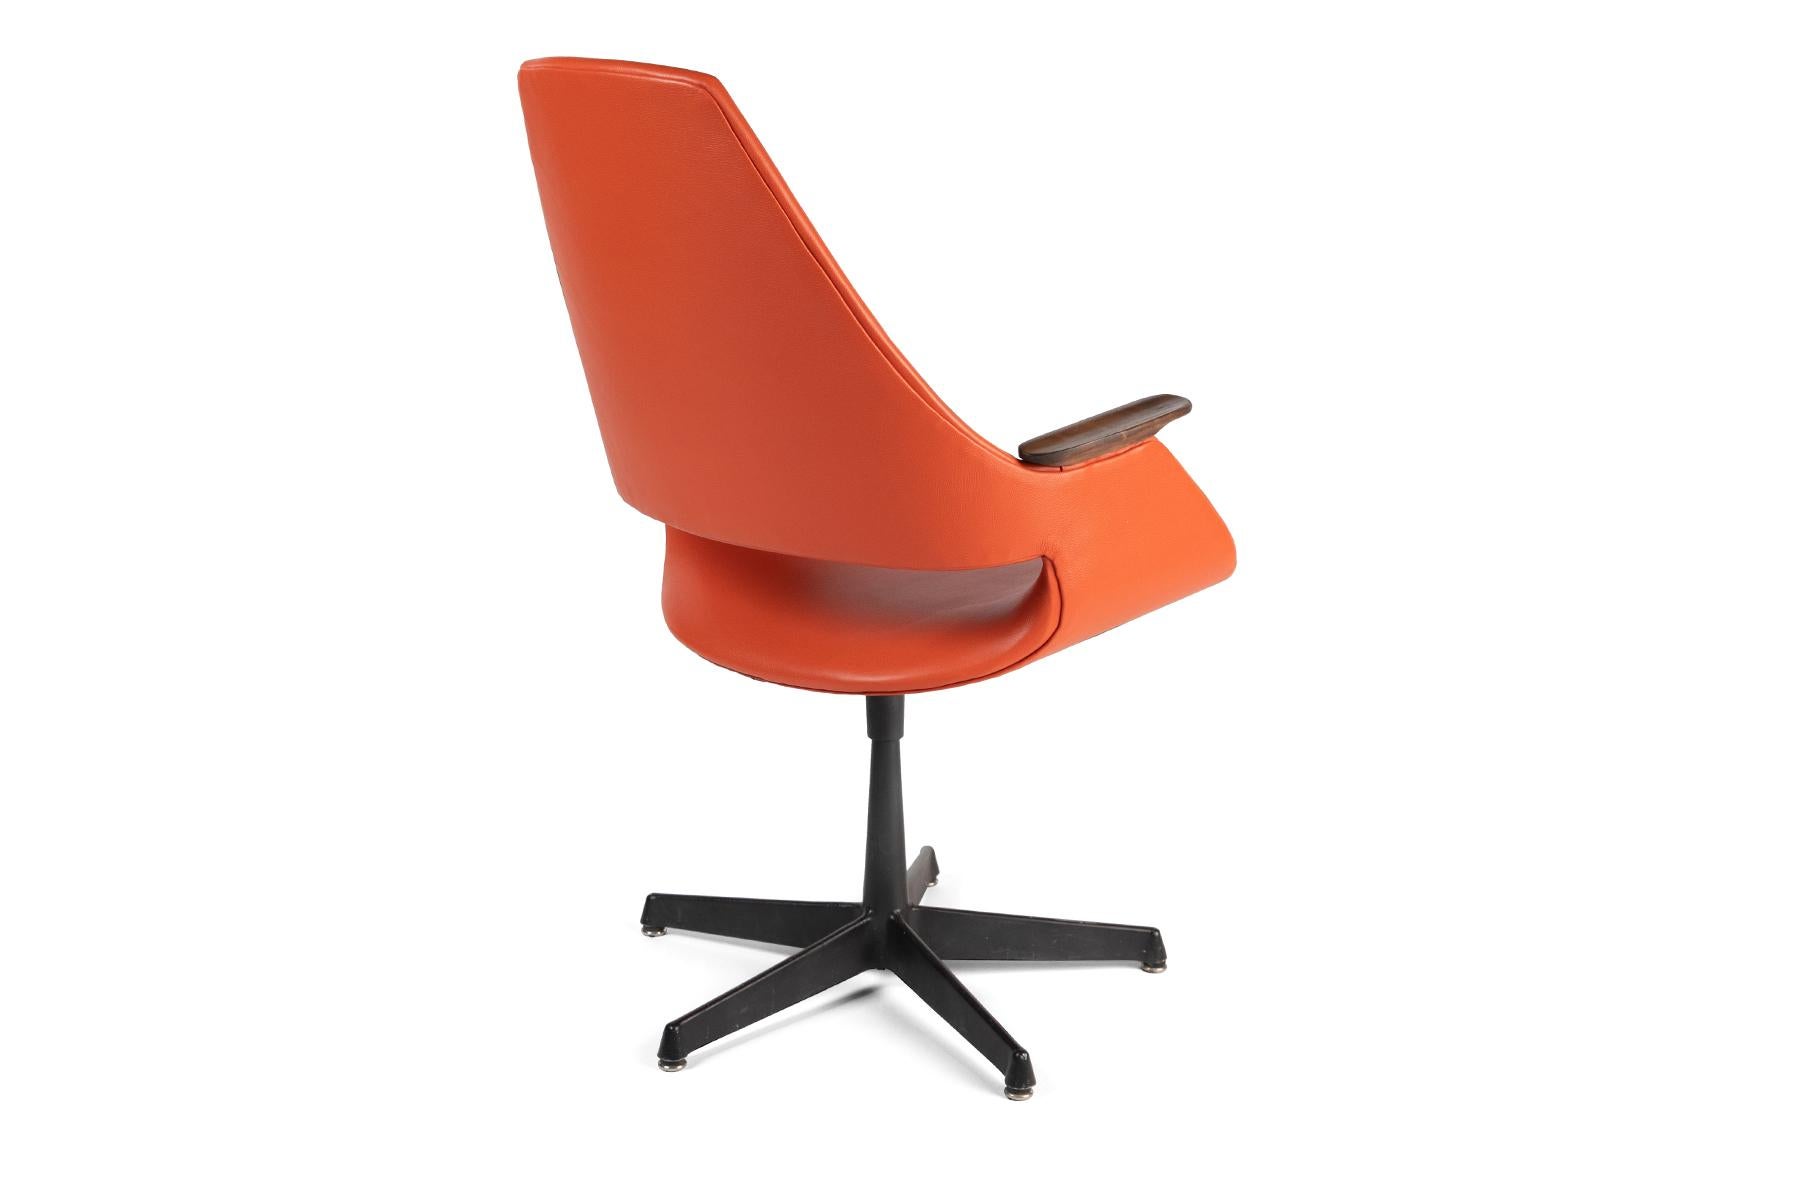 Arthur Umanoff orange leather, steel and walnut chair, circa late 1960s. This example has been newly upholstered in a persimmon orange Spinneybeck leather and the walnut arms refinished. Metal base retains patina. Arm height is 25